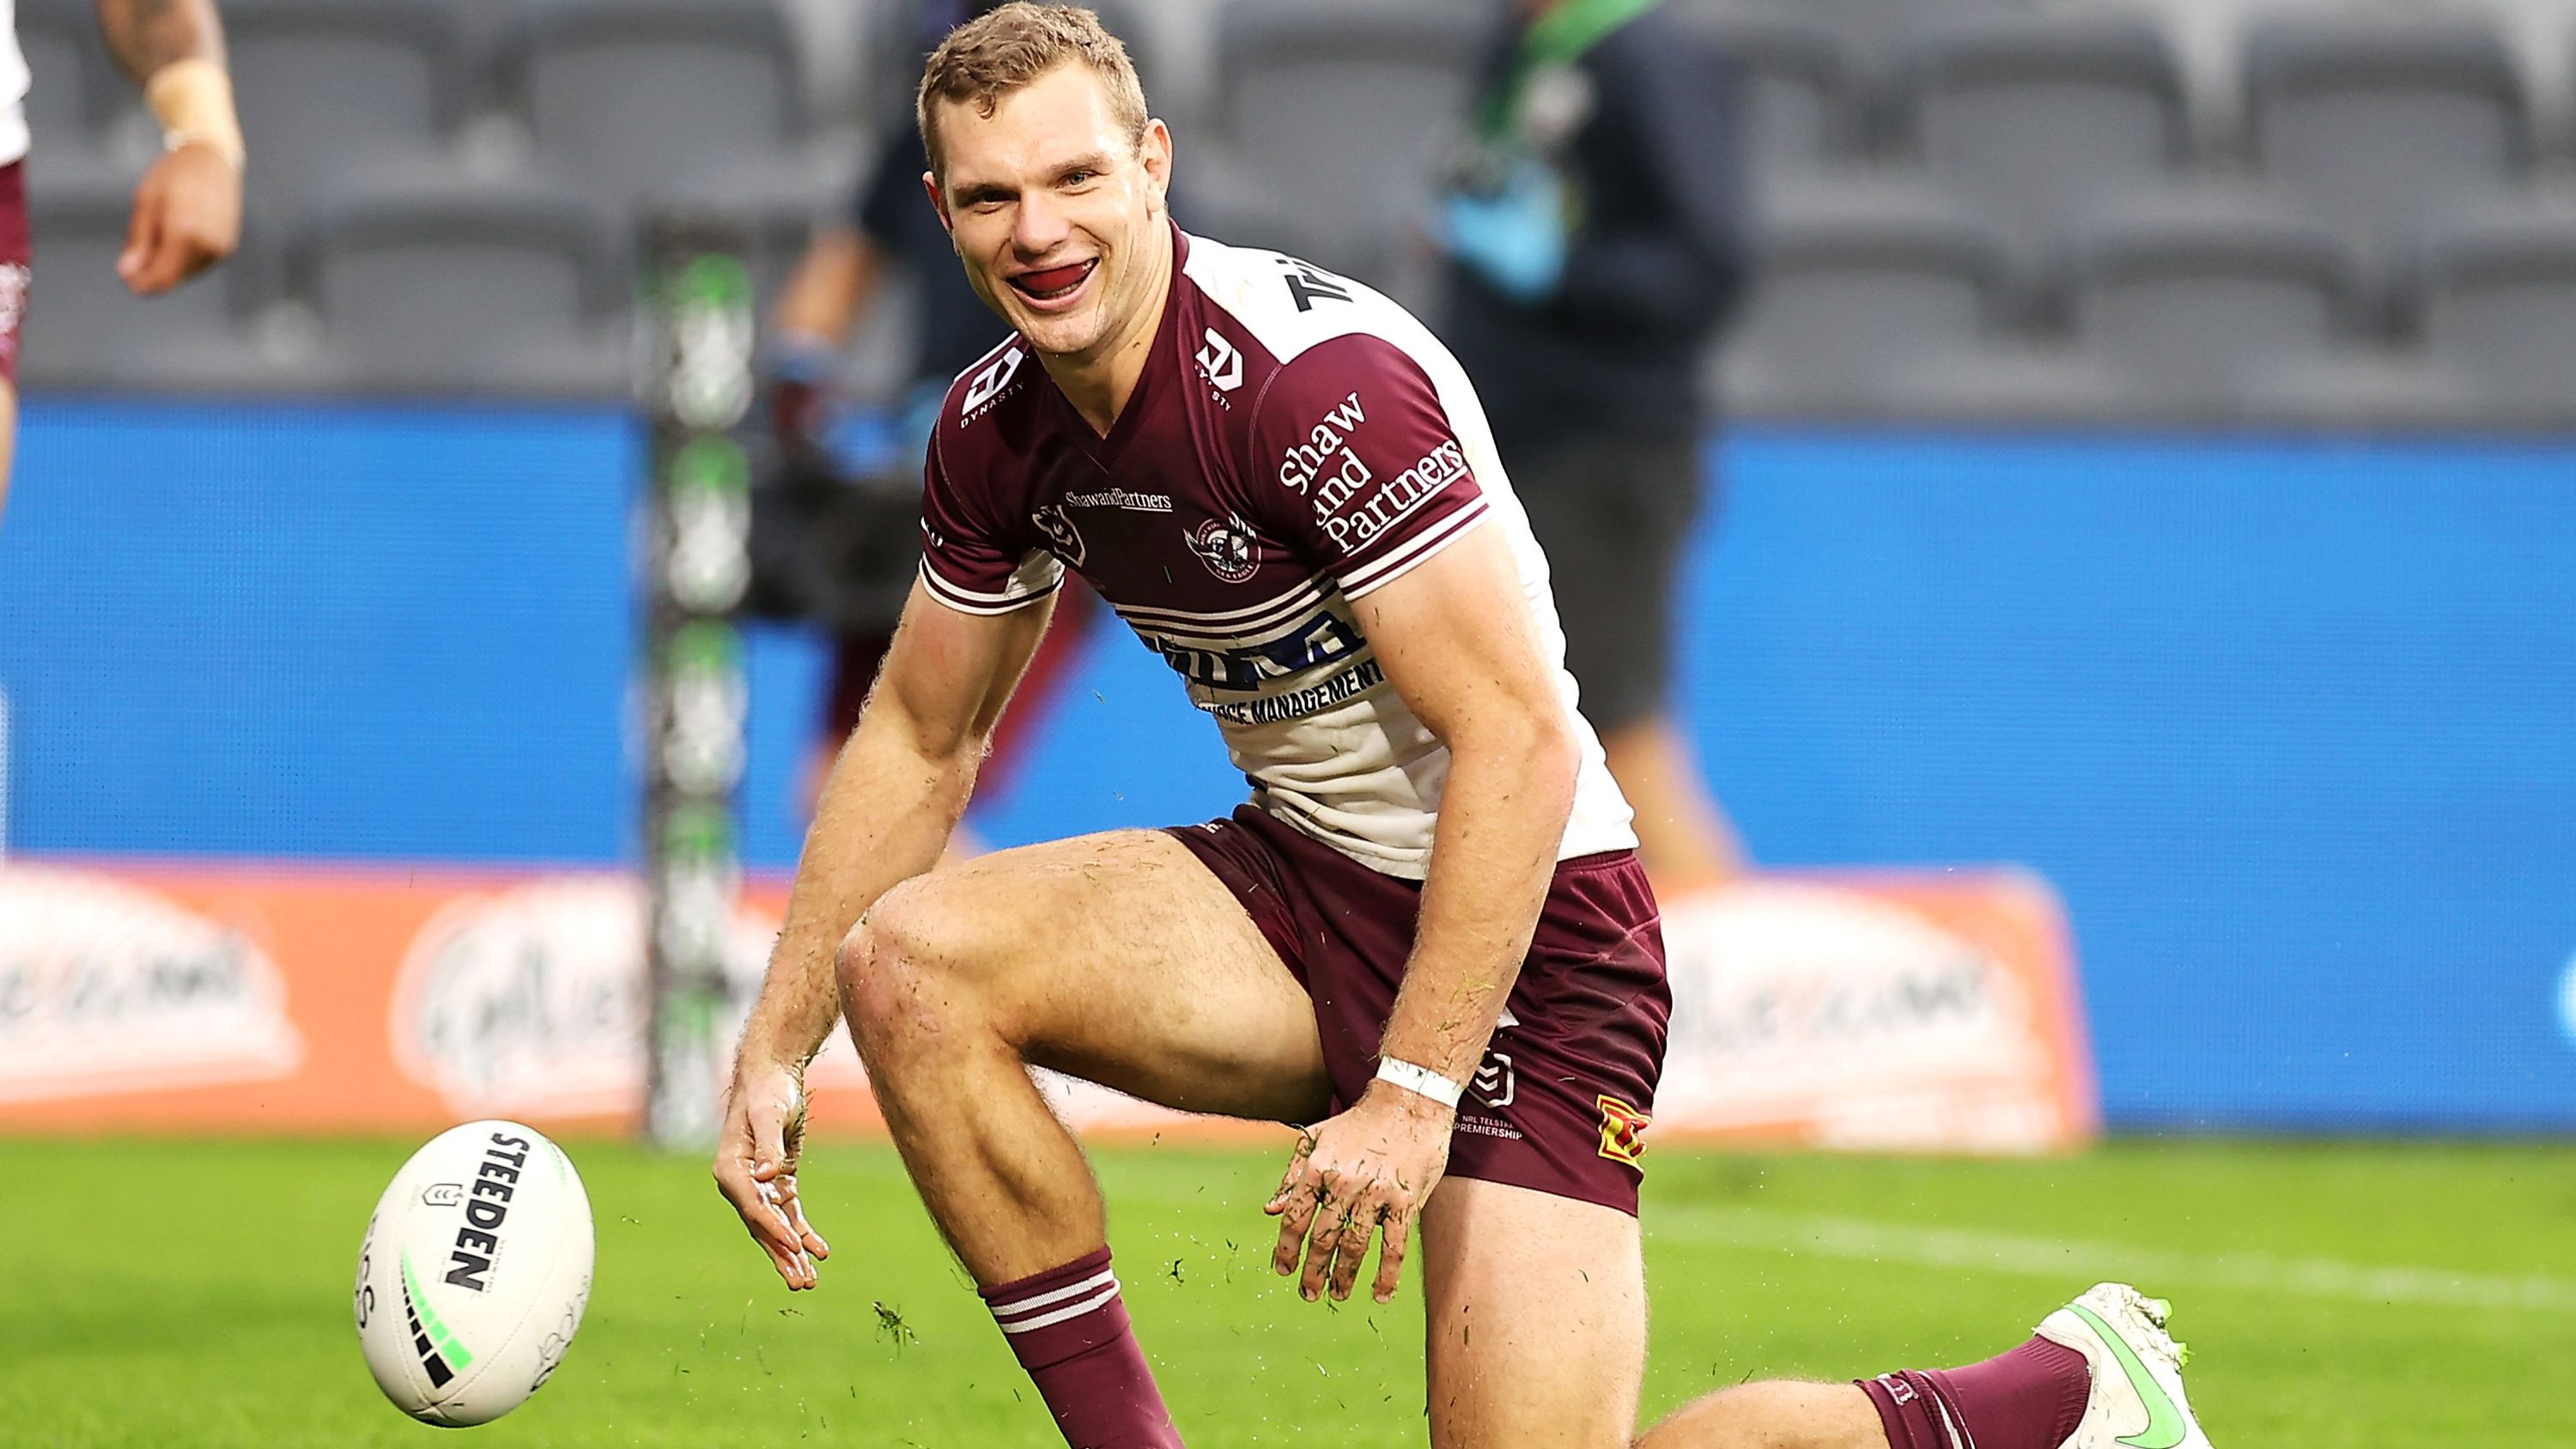 Trbojevic masterclass leads Manly to emphatic win over Cronulla Sharks as tempers flare